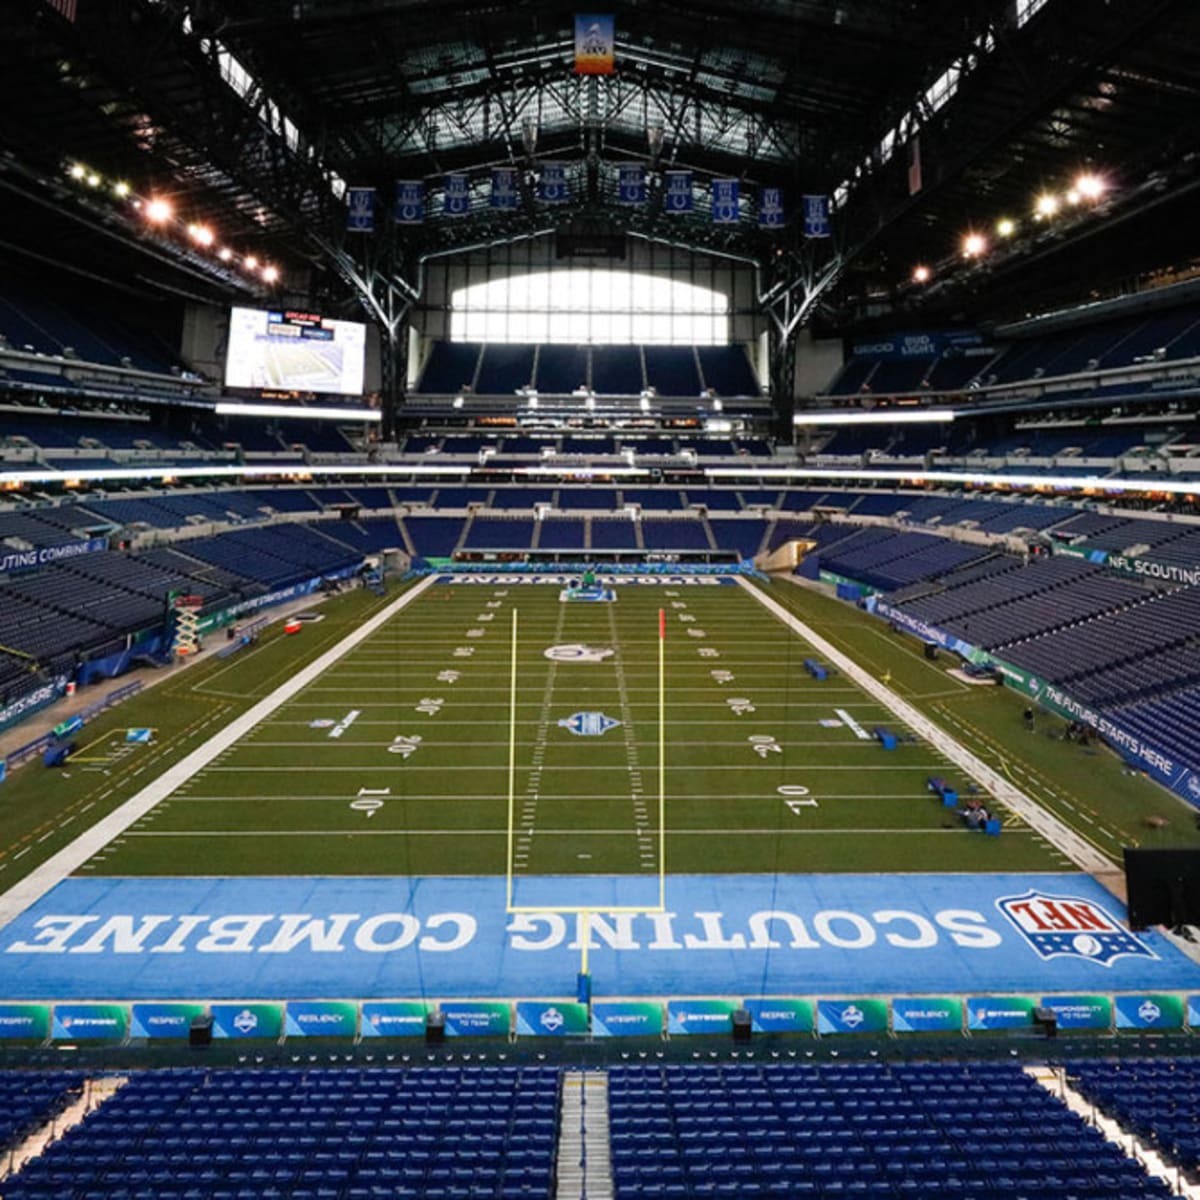 The 2022 NFL Scouting Combine will be in Indianapolis - Could Move in 2023  - Visit NFL Draft on Sports Illustrated, the latest news coverage, with  rankings for NFL Draft prospects, College